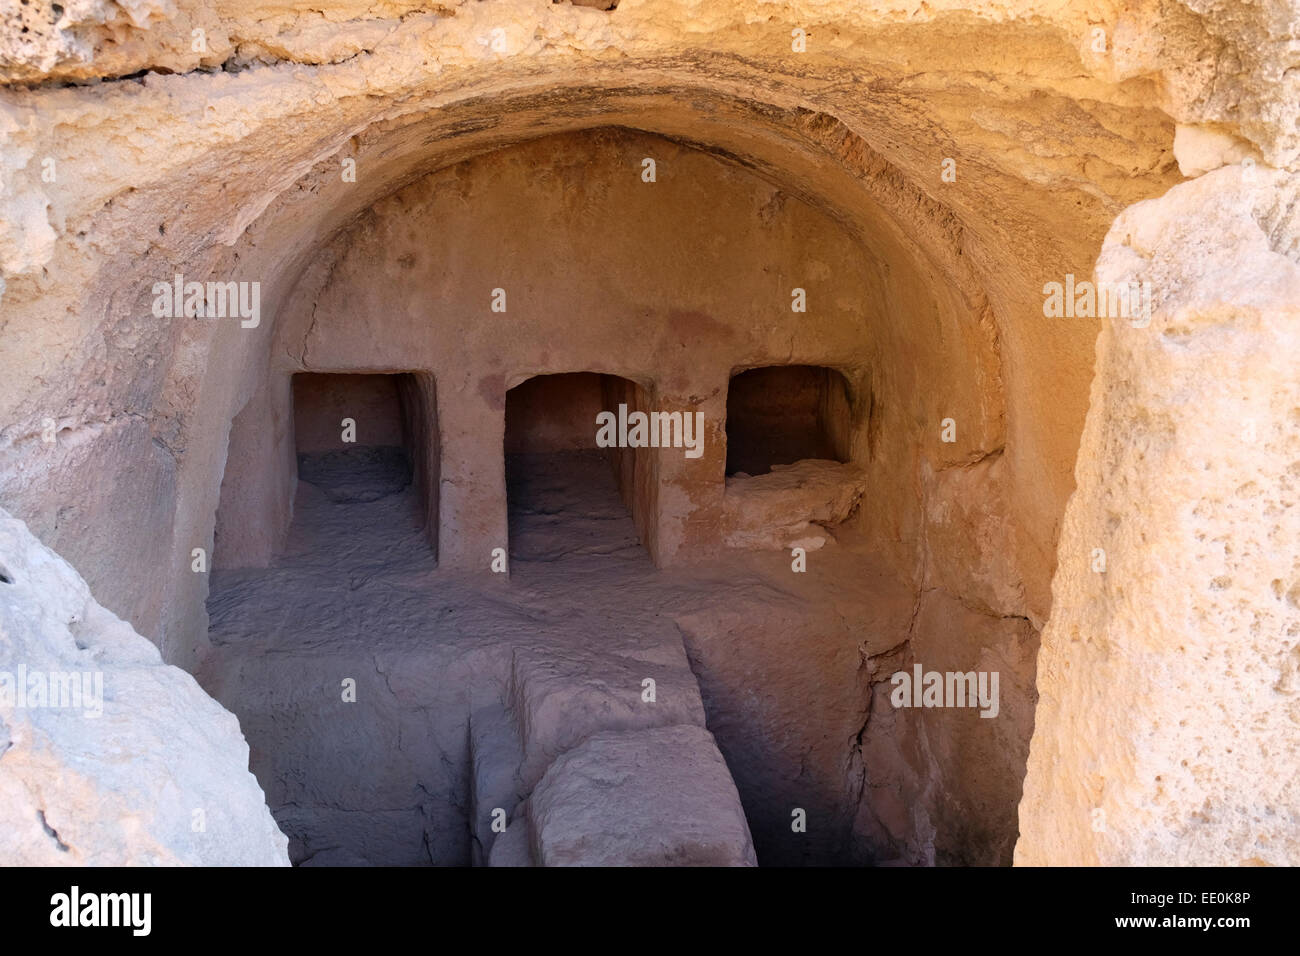 Tombs of the Kings, Cyprus. Tomb 2 showing the burial chamber with loculi and pit graves.  Hellenistic period. Stock Photo